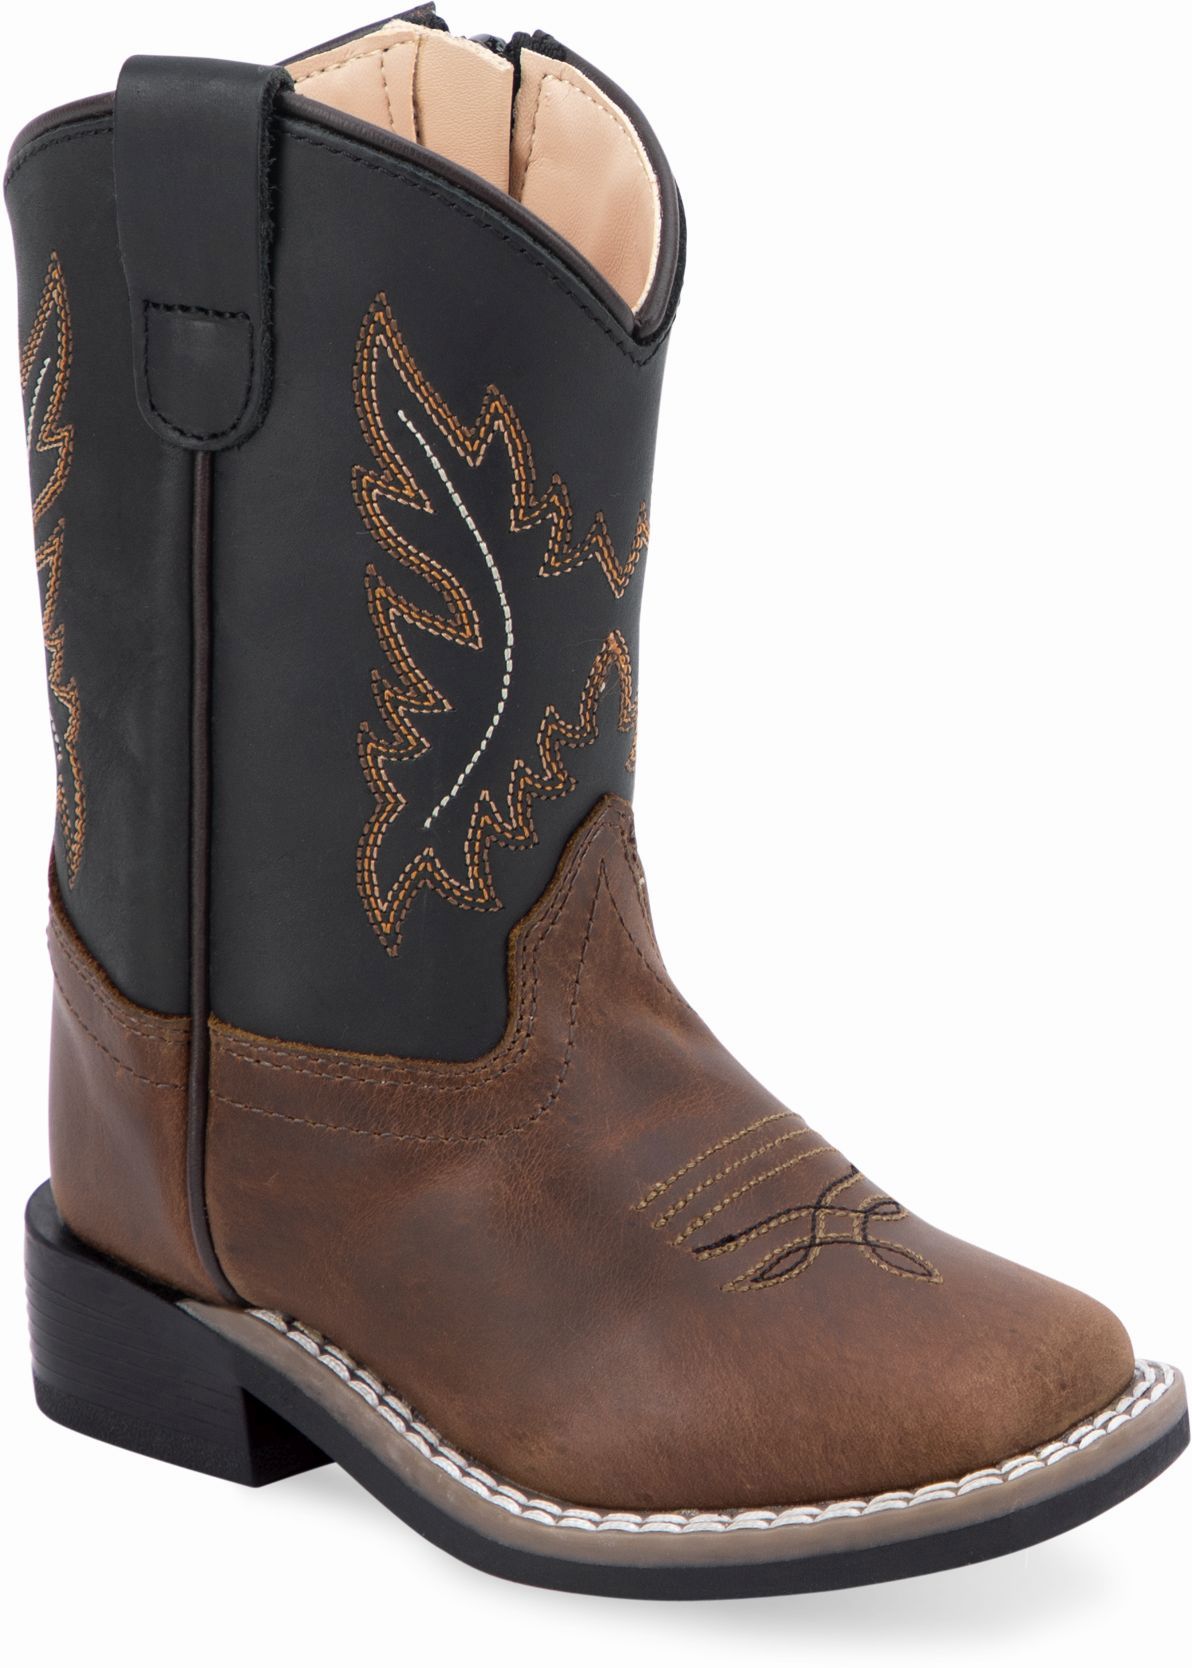 Old West Crazy Horse Light Brown Foot Black Canyon Shaft Toddler's Broad Square Toe Boots